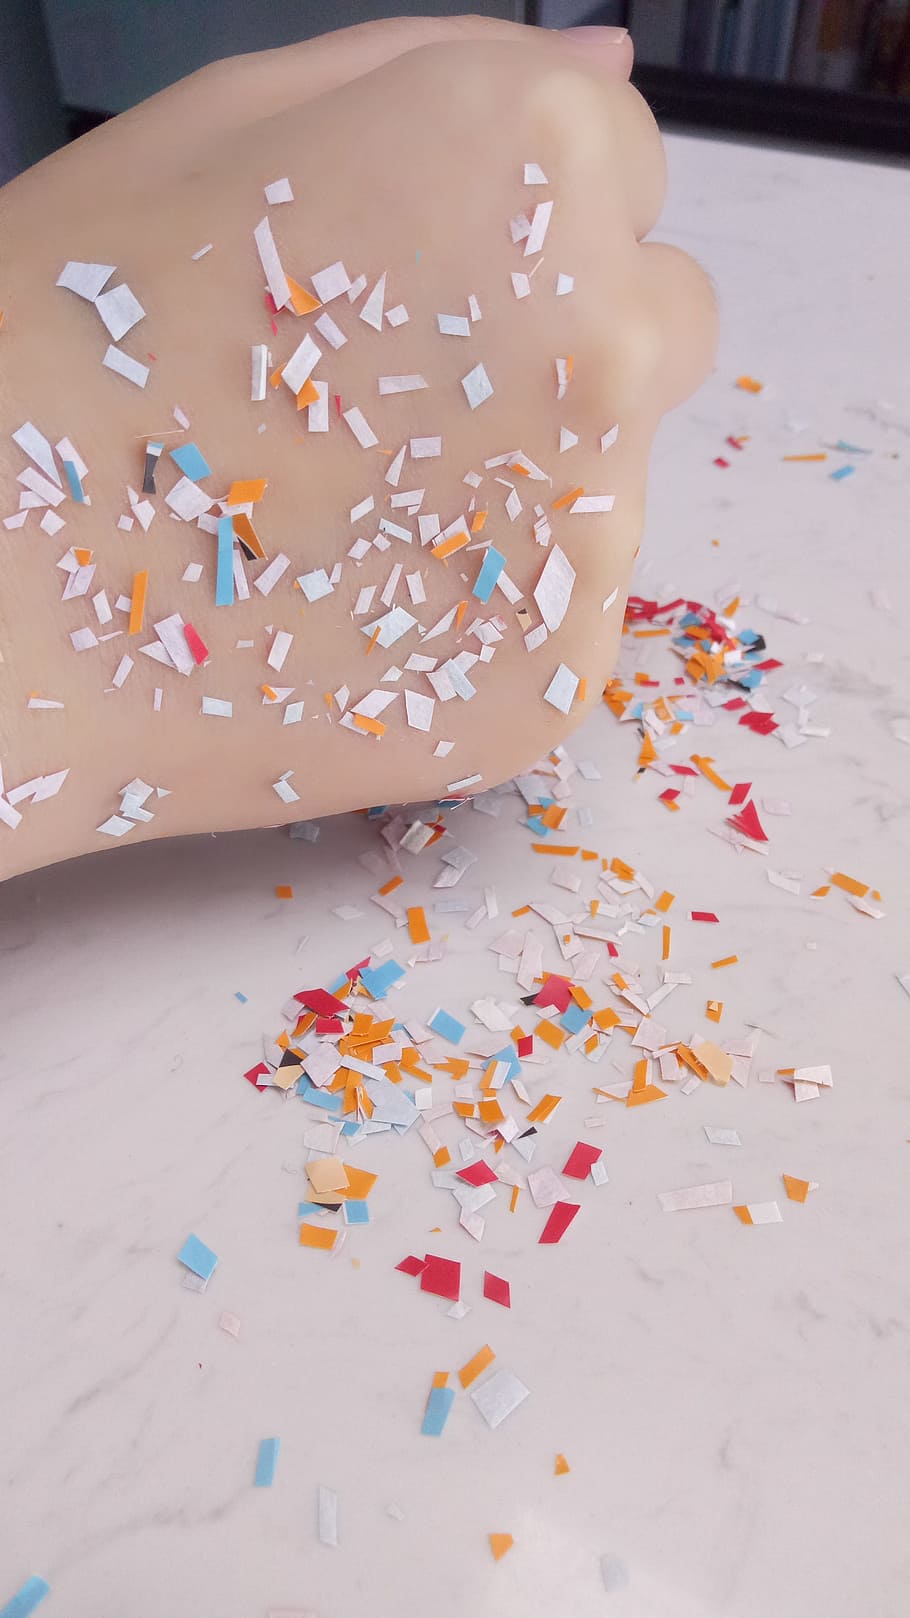 color, label, hand, how much, multi colored, confetti, indoors, celebration, food and drink, close-up